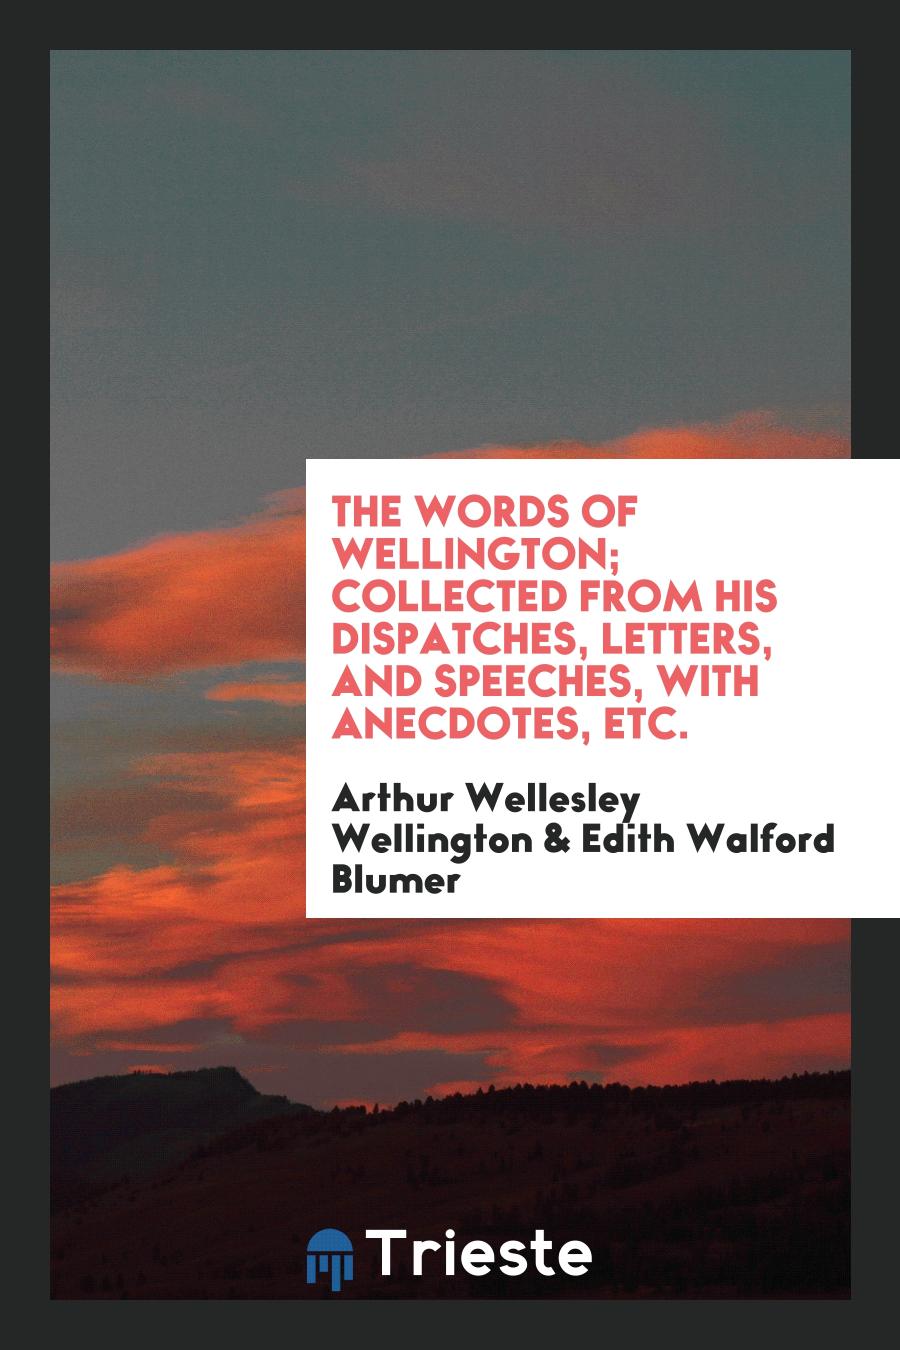 The words of Wellington; collected from his dispatches, letters, and speeches, with anecdotes, etc.